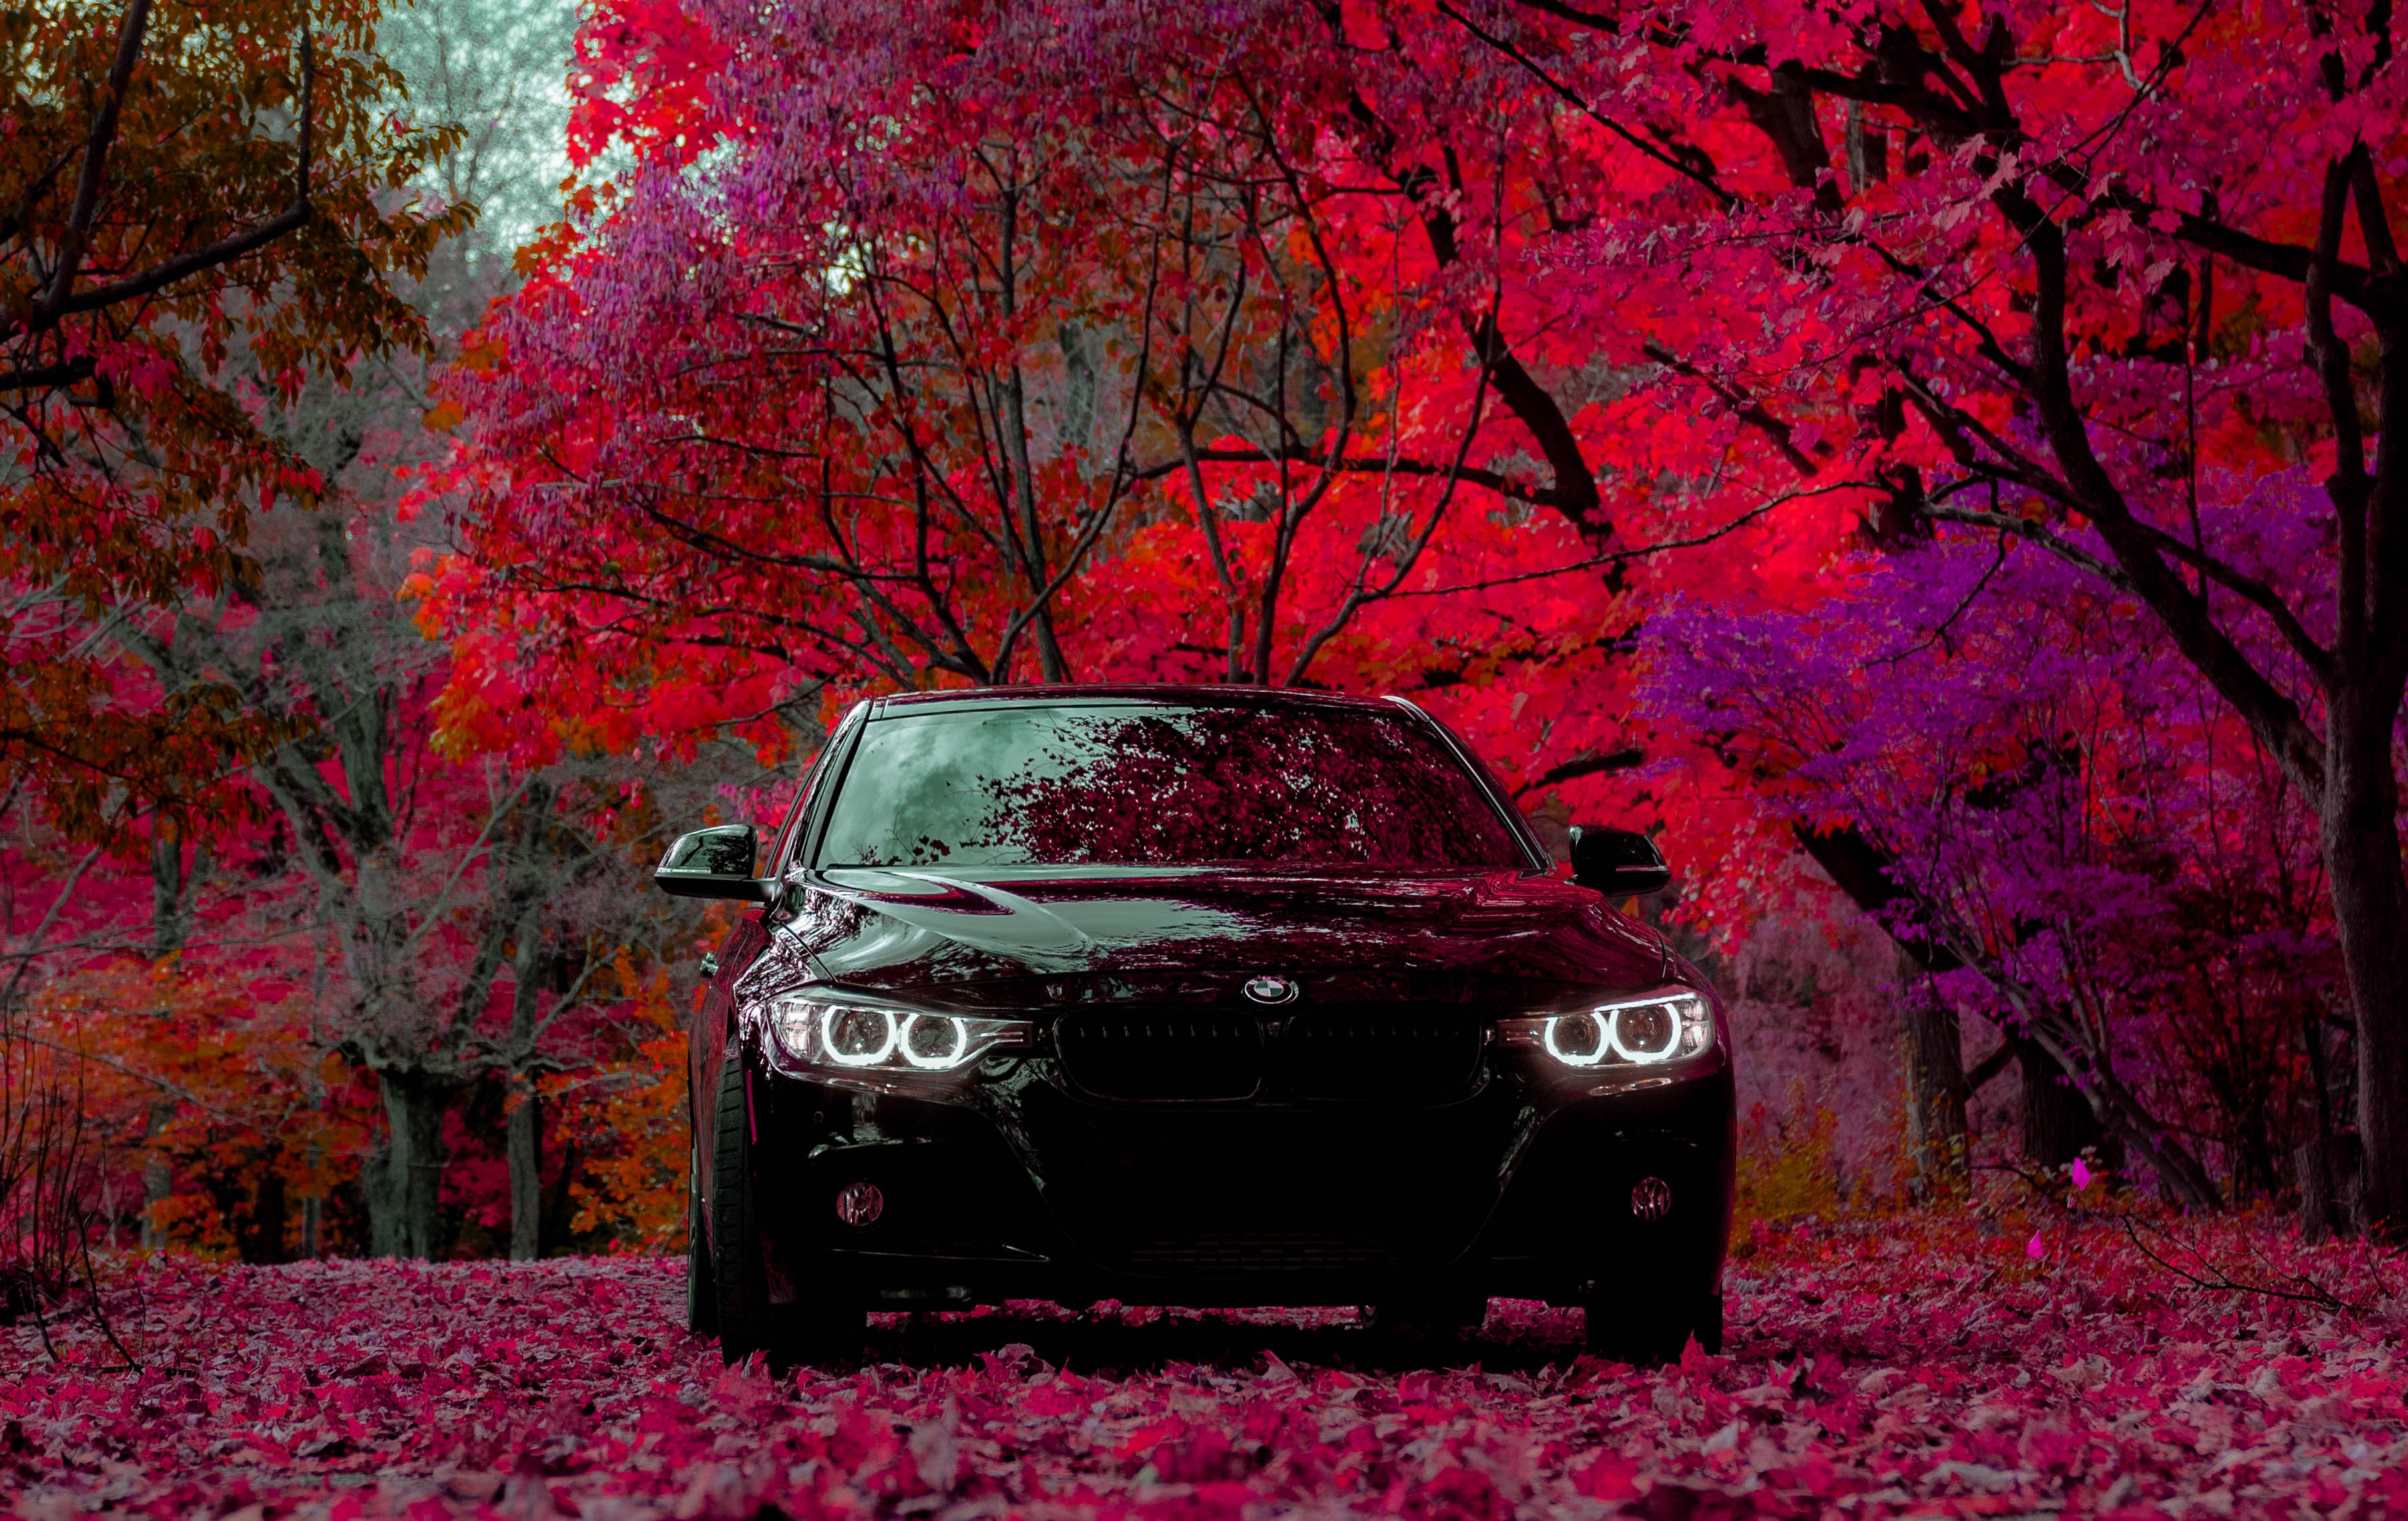 bmw, cars, black, forest, car, front view, machine, bmw f30 335i iphone wallpaper